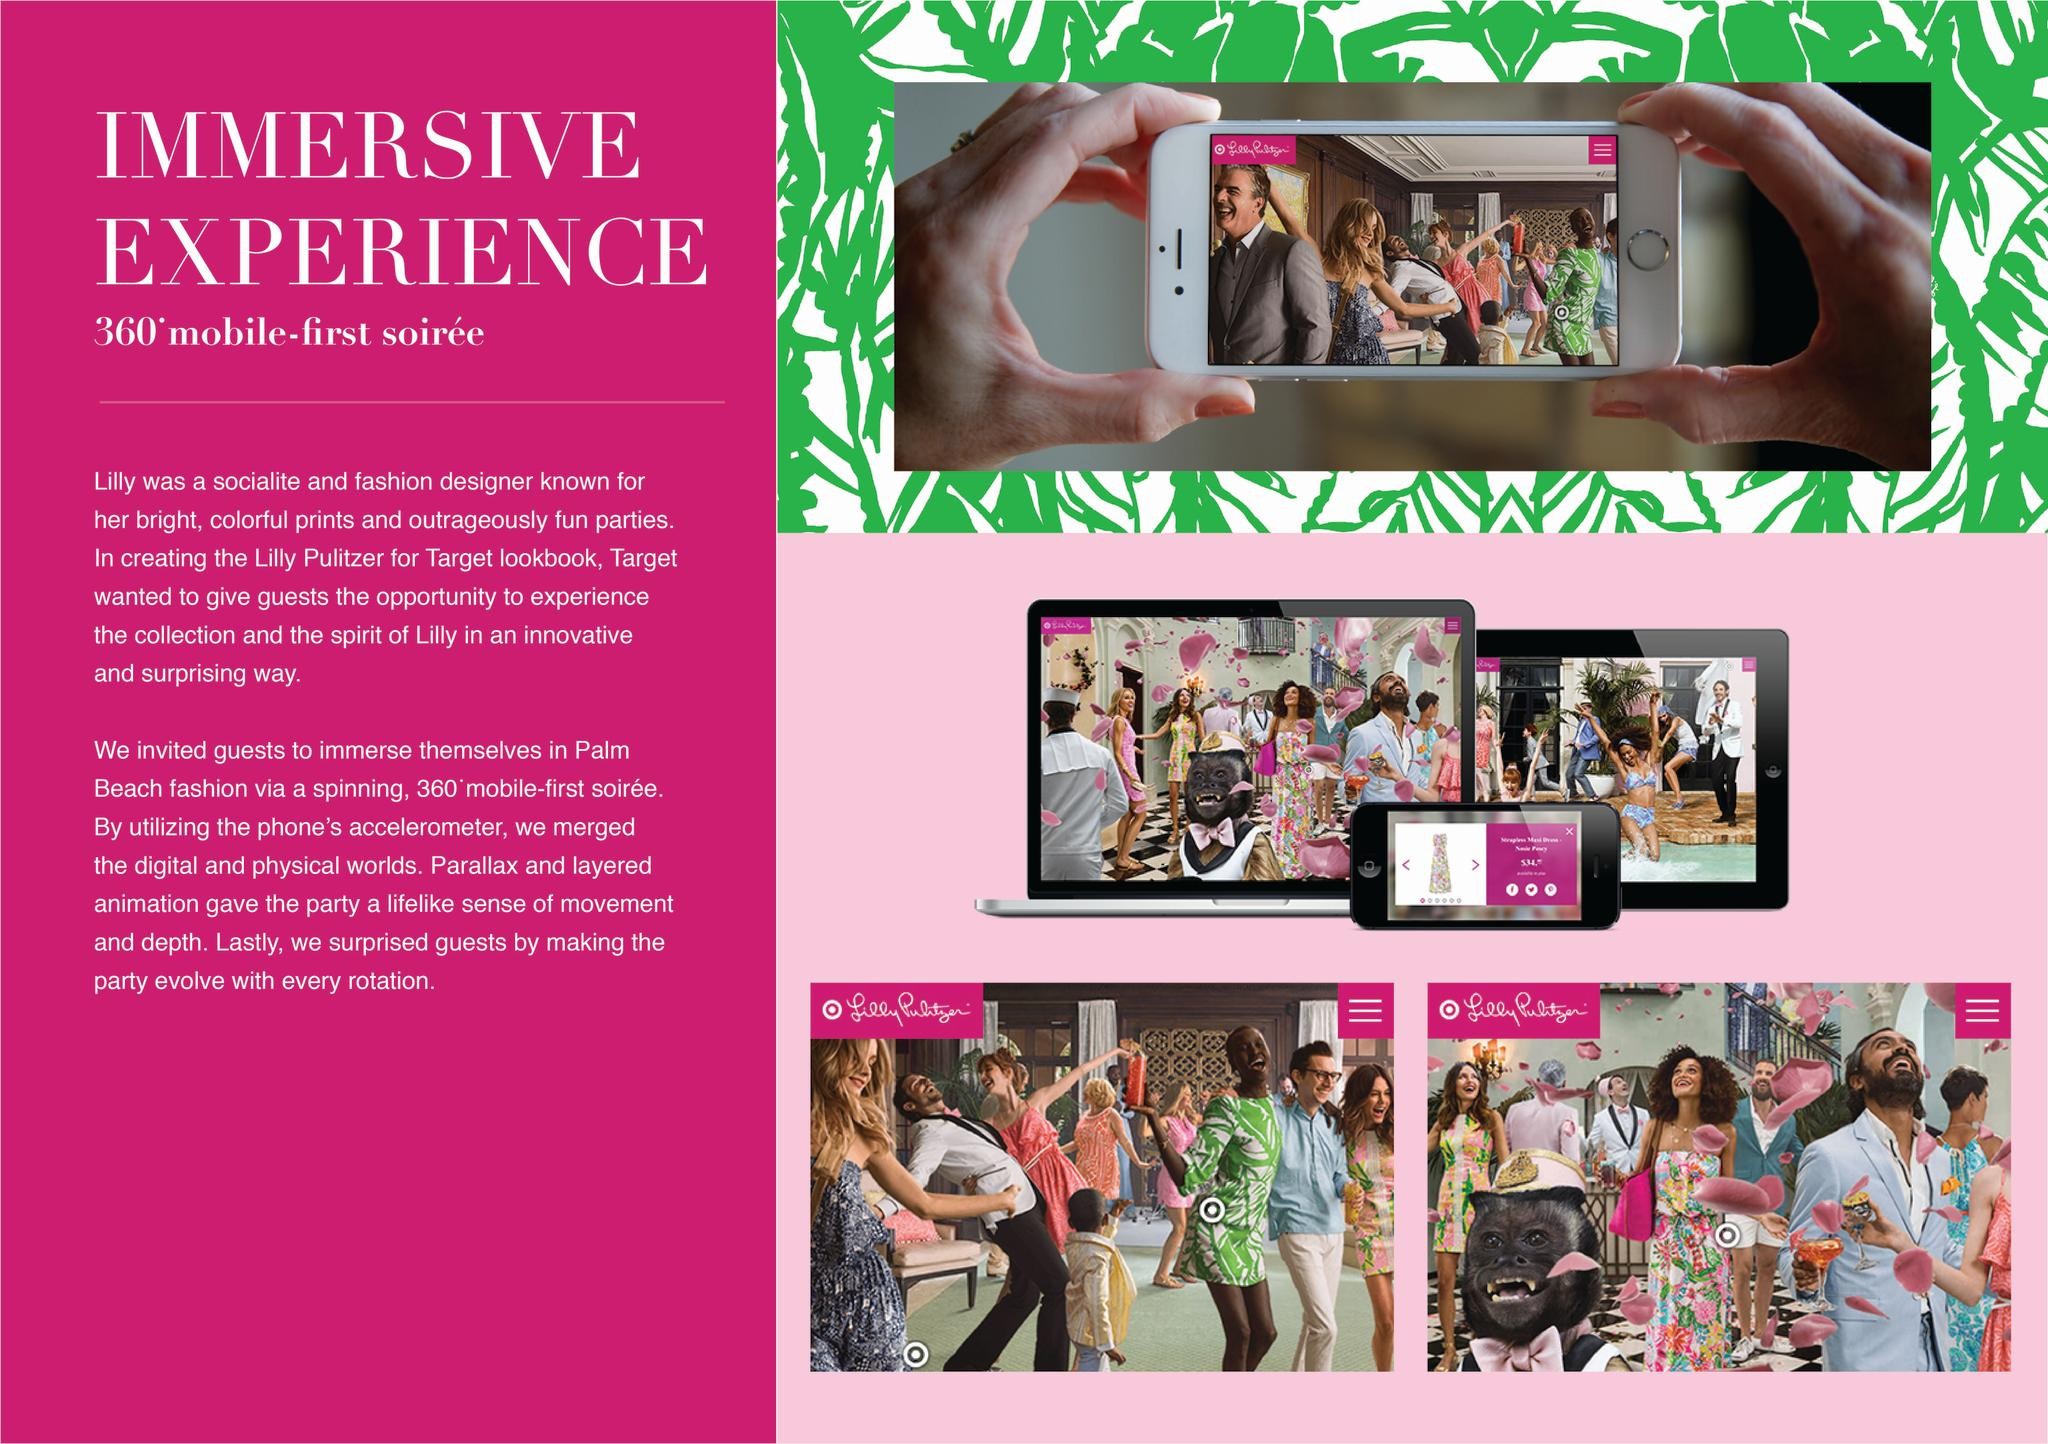 LILLY PULITZER FOR TARGET IMMERSIVE PARTY